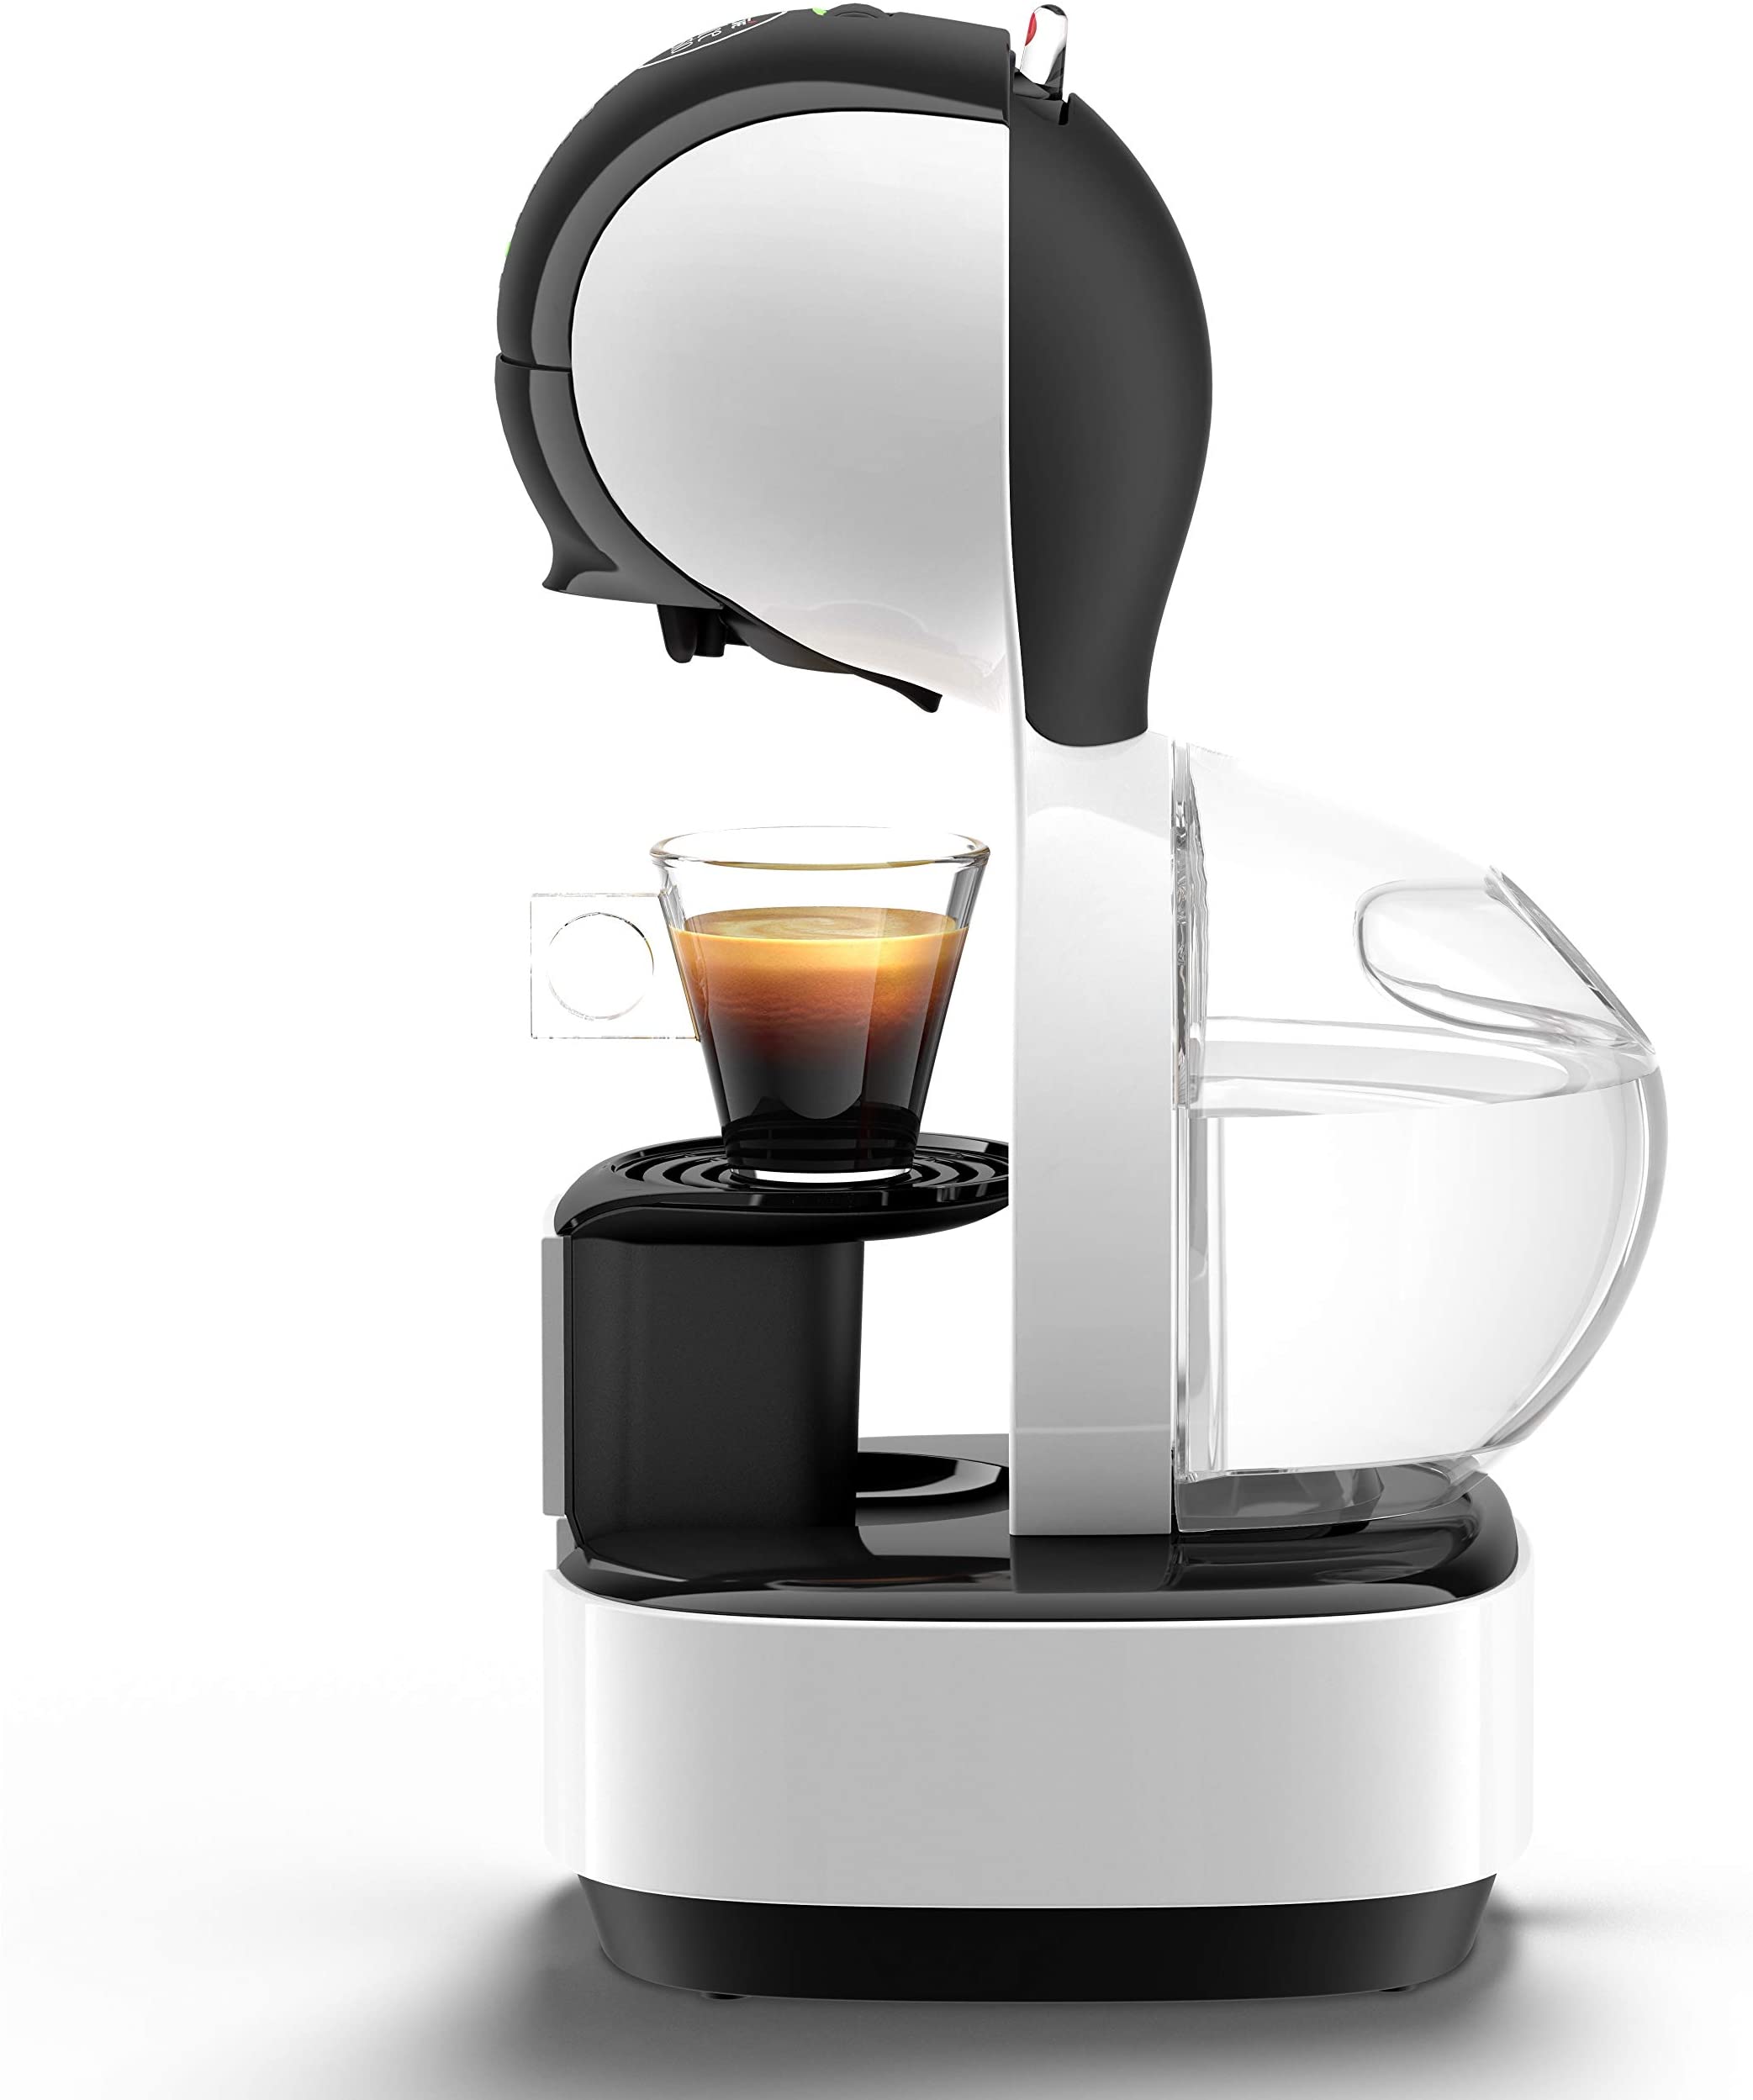 Dolce Gusto Coffee Machine EDG268.W price in Bahrain, Buy Dolce Gusto  Coffee Machine EDG268.W in Bahrain.